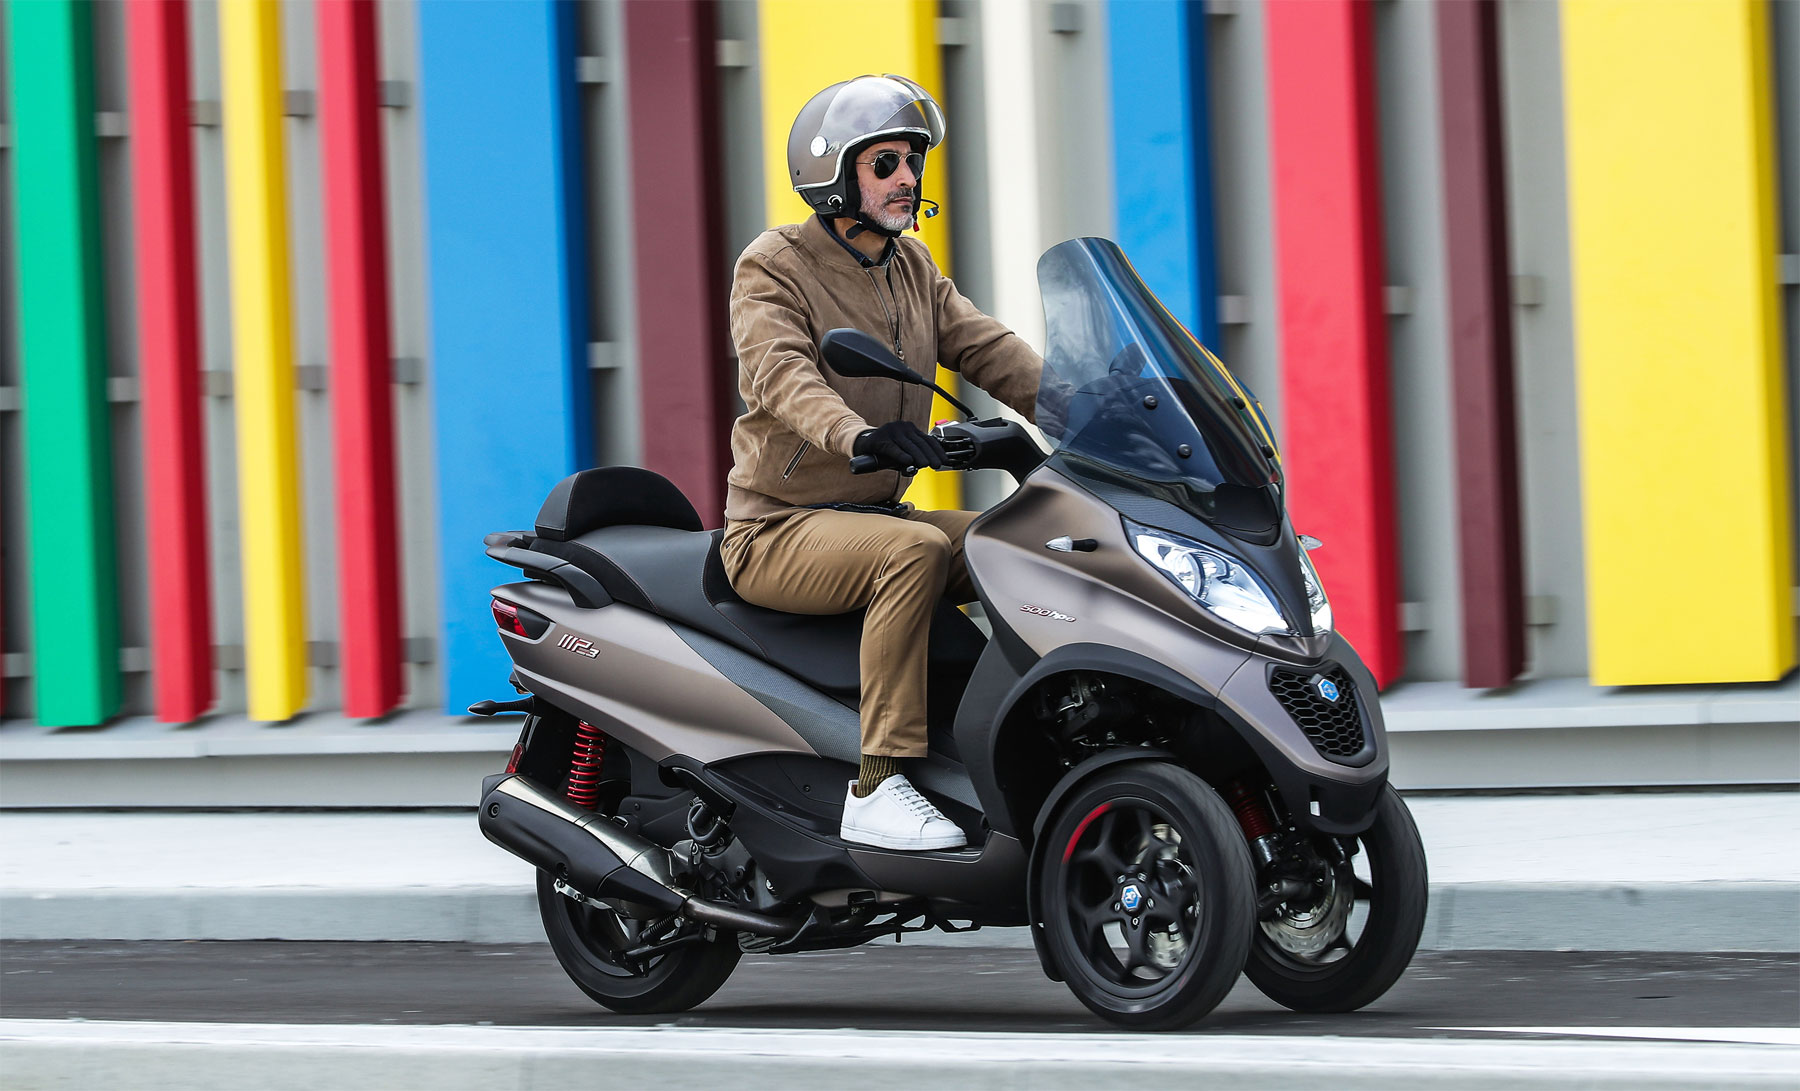 Ijsbeer Plantkunde Aannemer The Piaggio MP3 Sport Advanced 500 Three Wheel Scooter Ticks All The Boxes